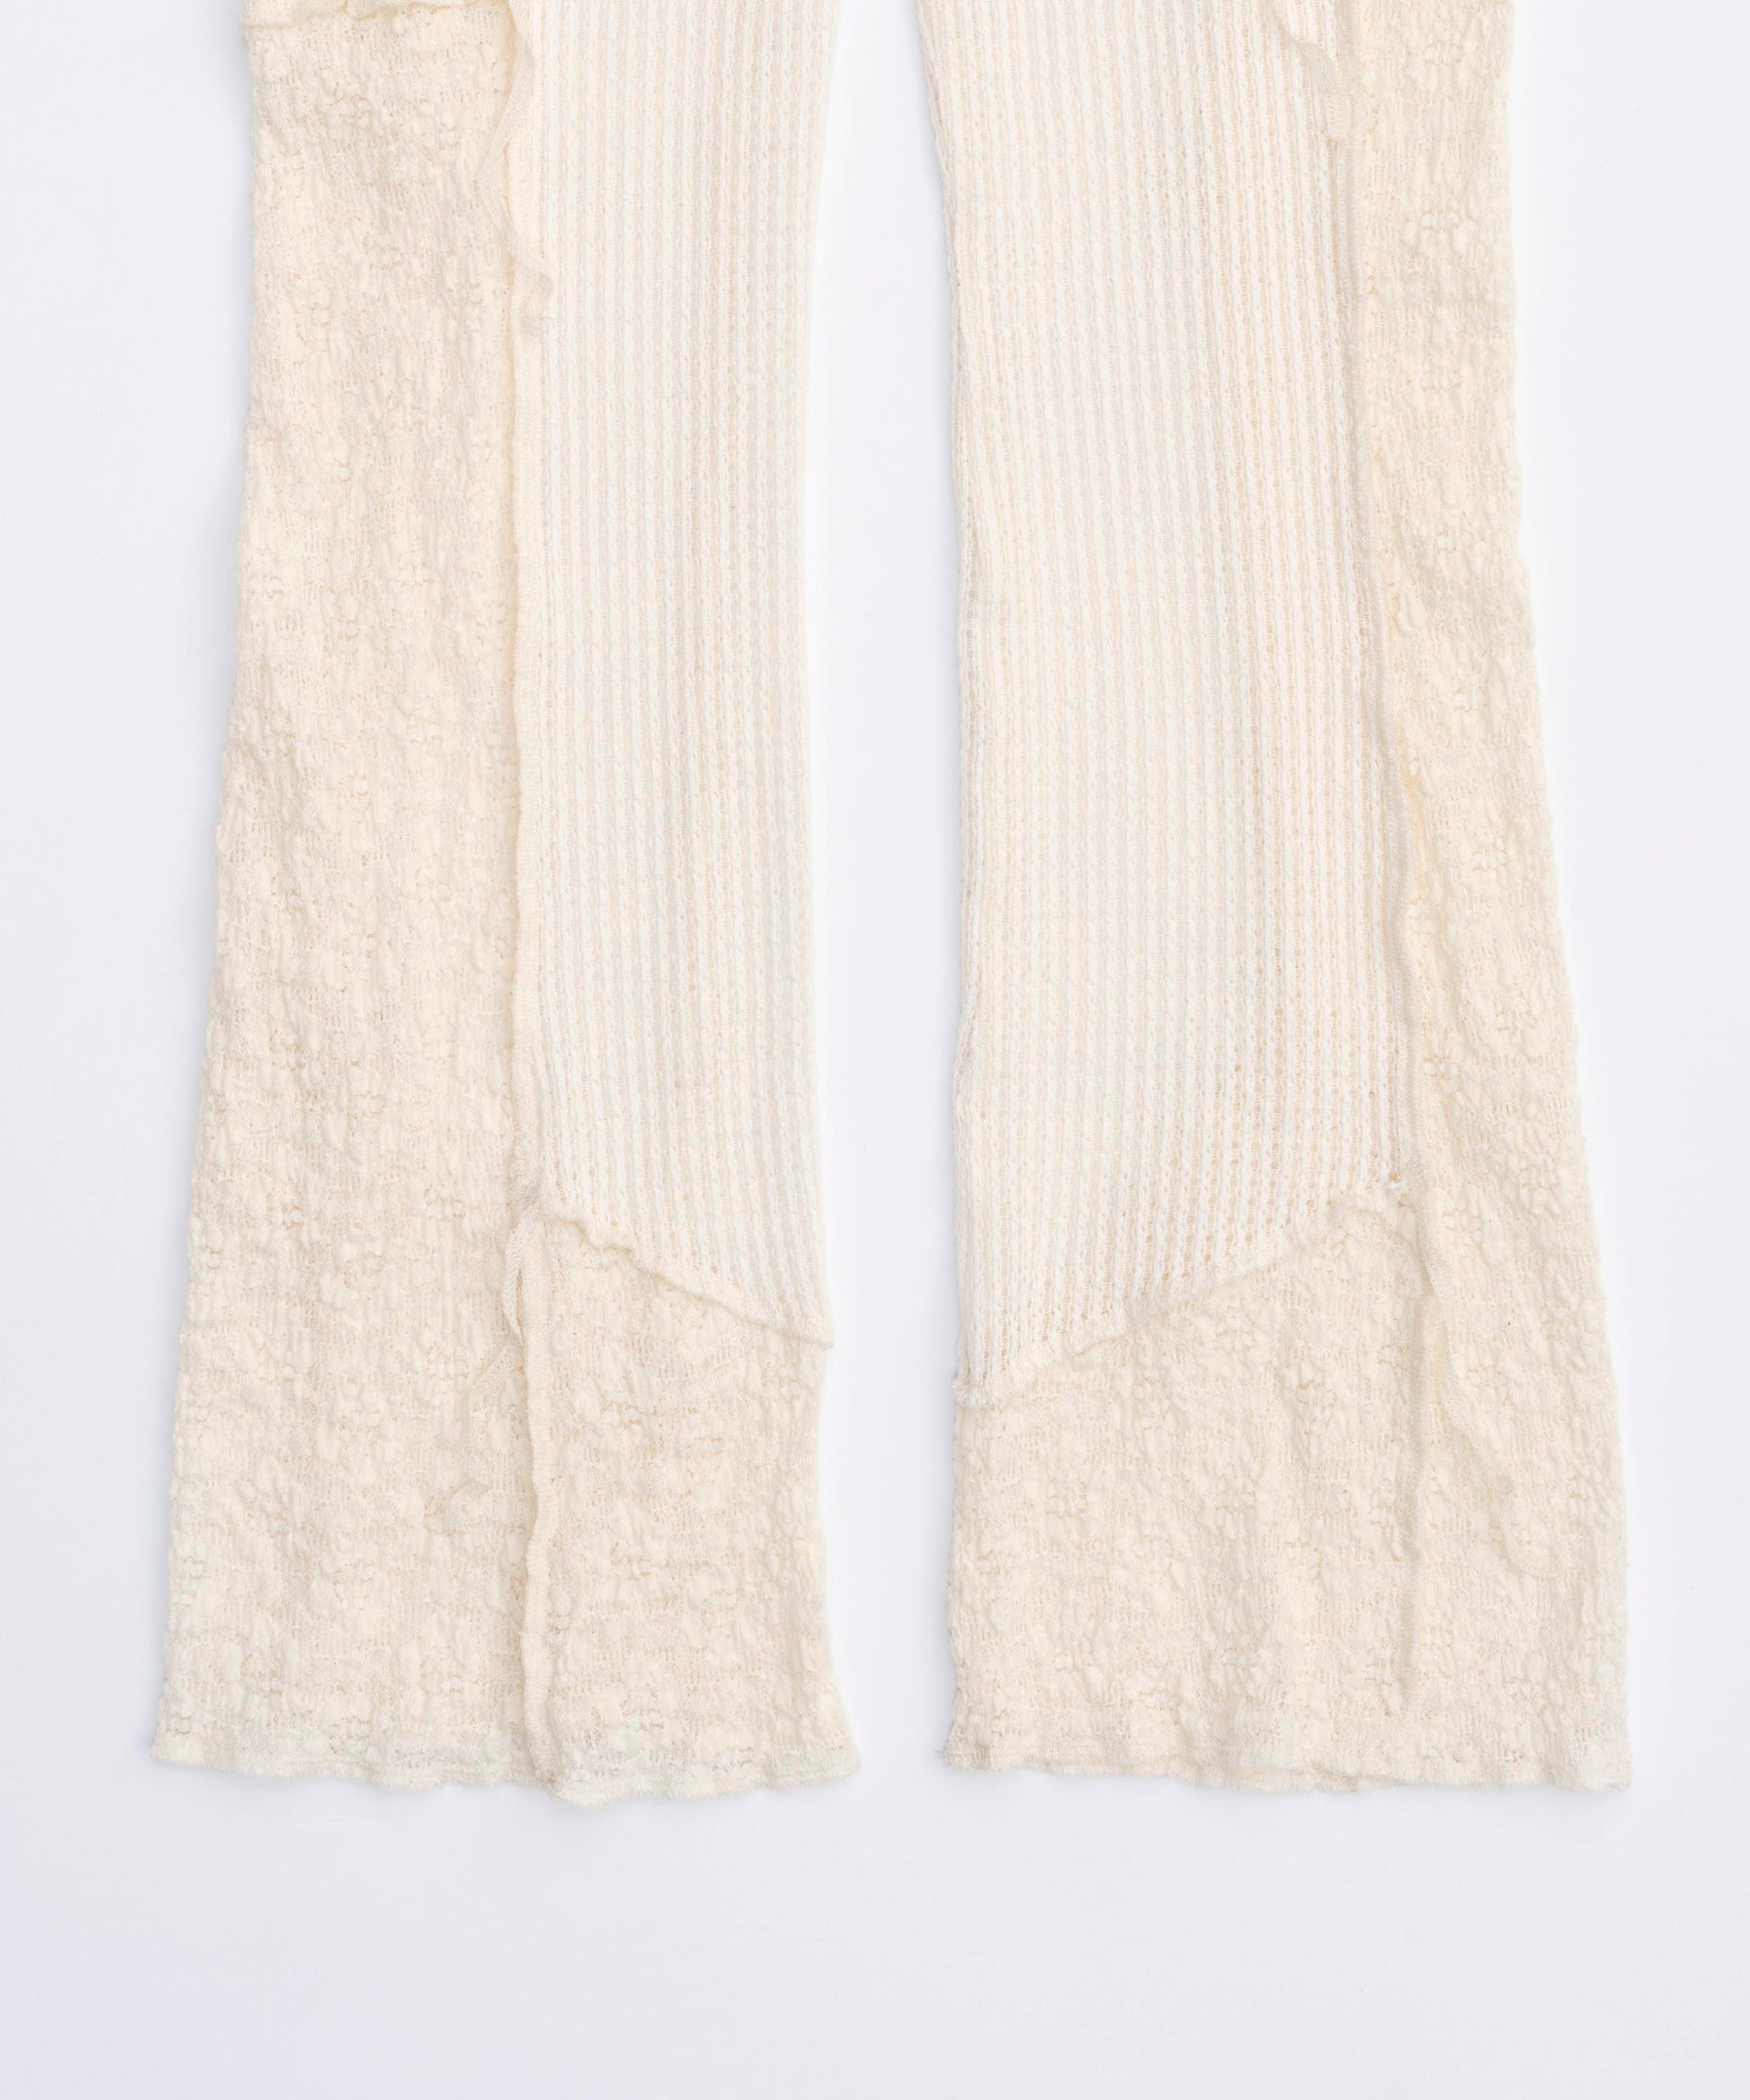 【PRE-ORDER】Mesh Combination Outseam Flare Pants